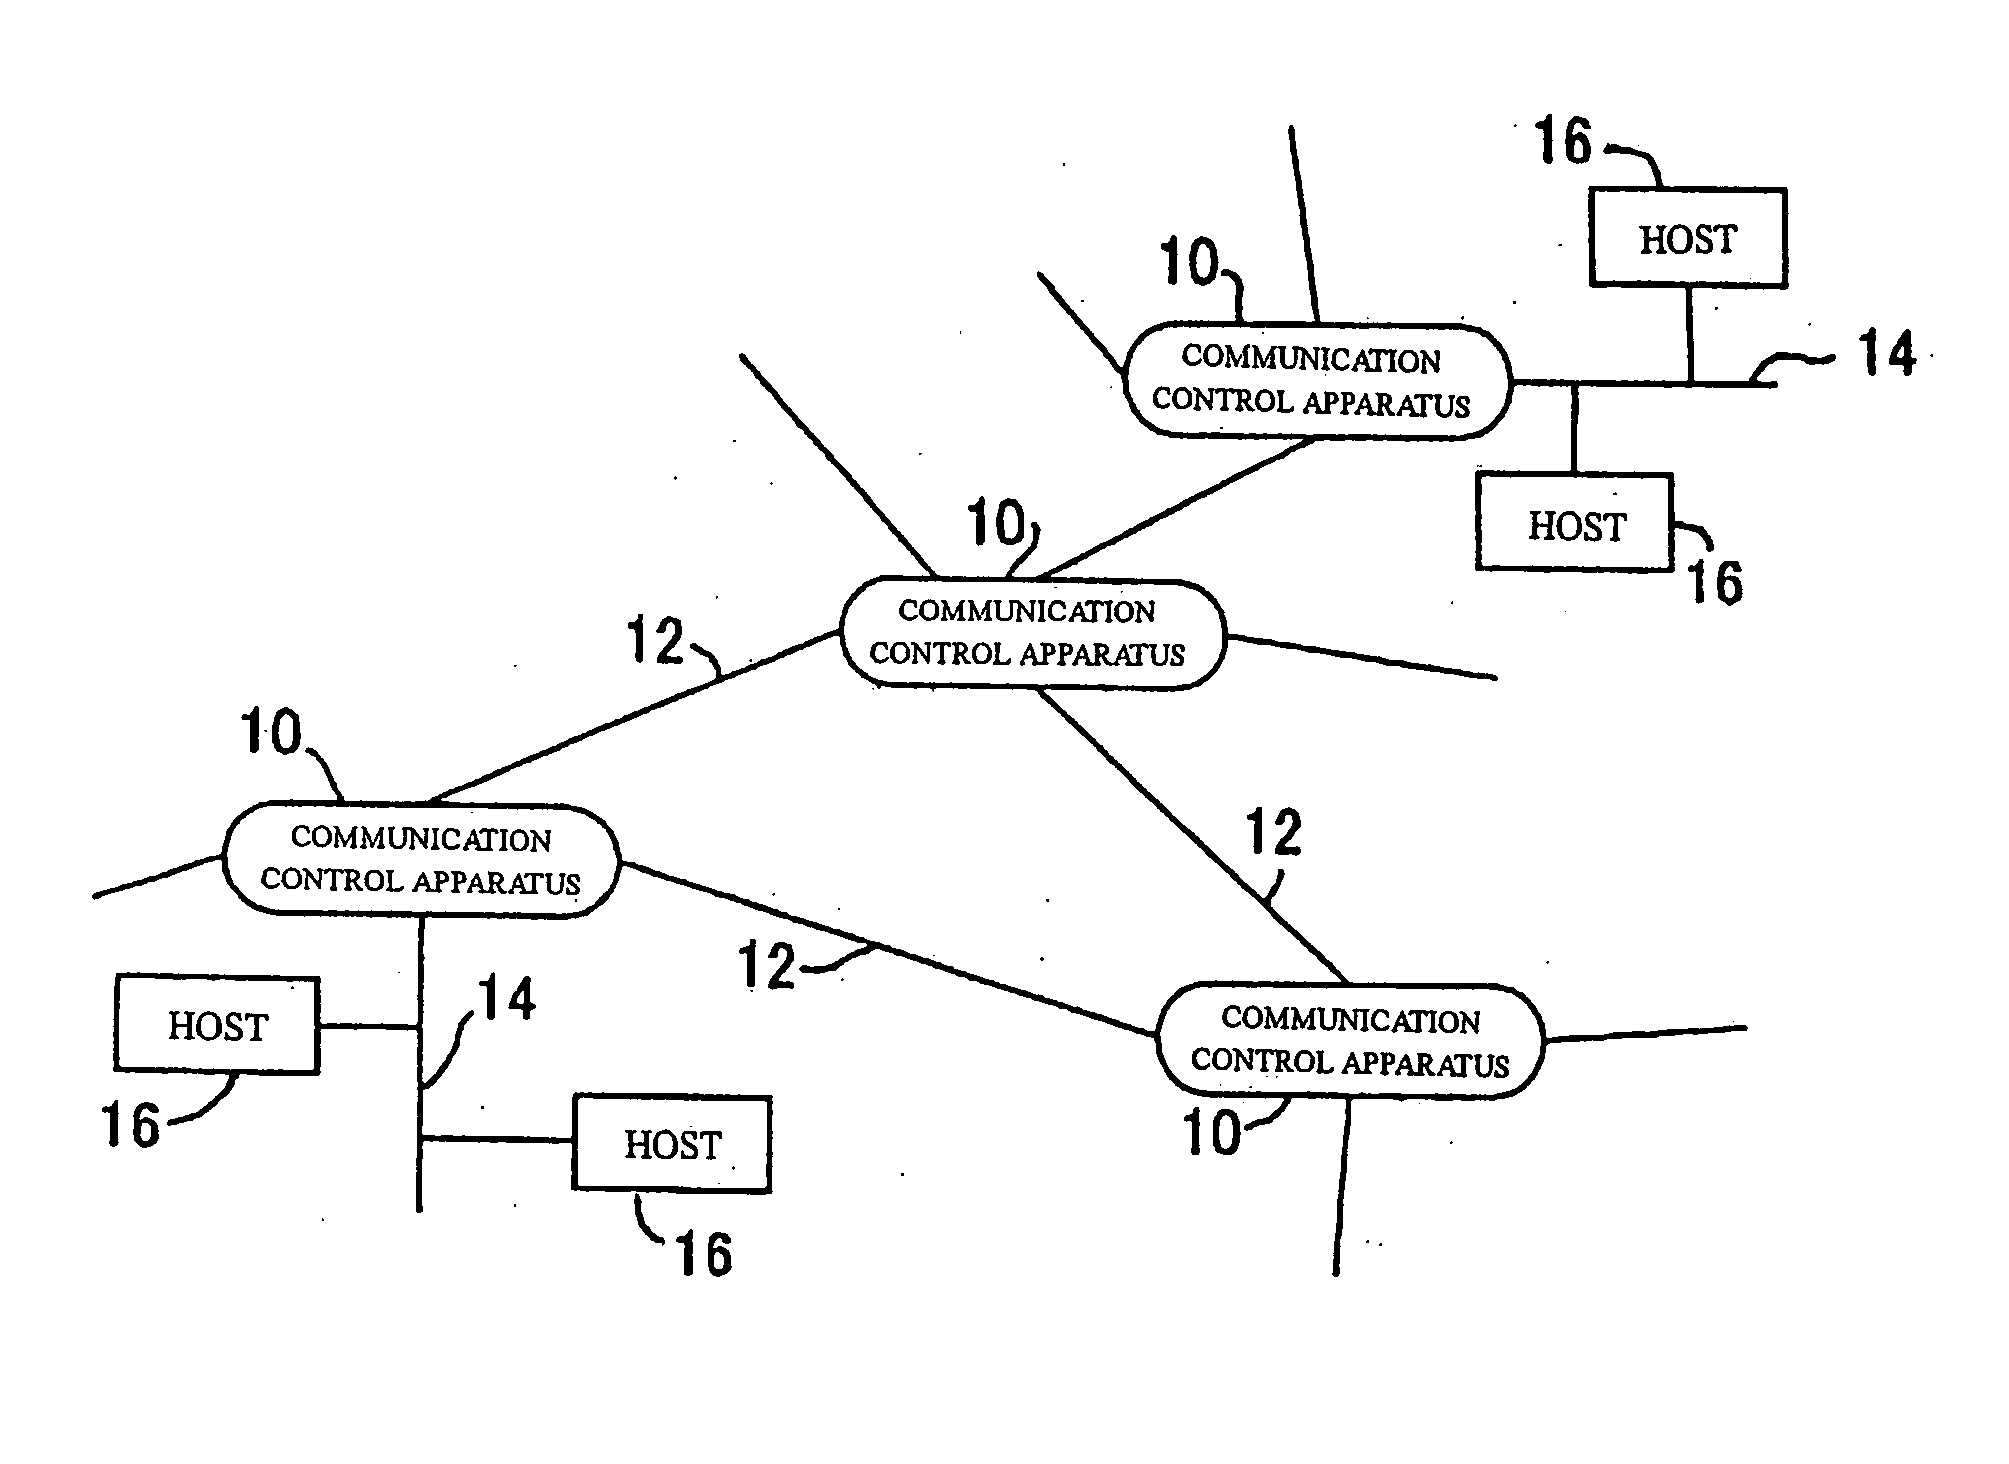 Communication control apparatus and method for searching an internet protocol address